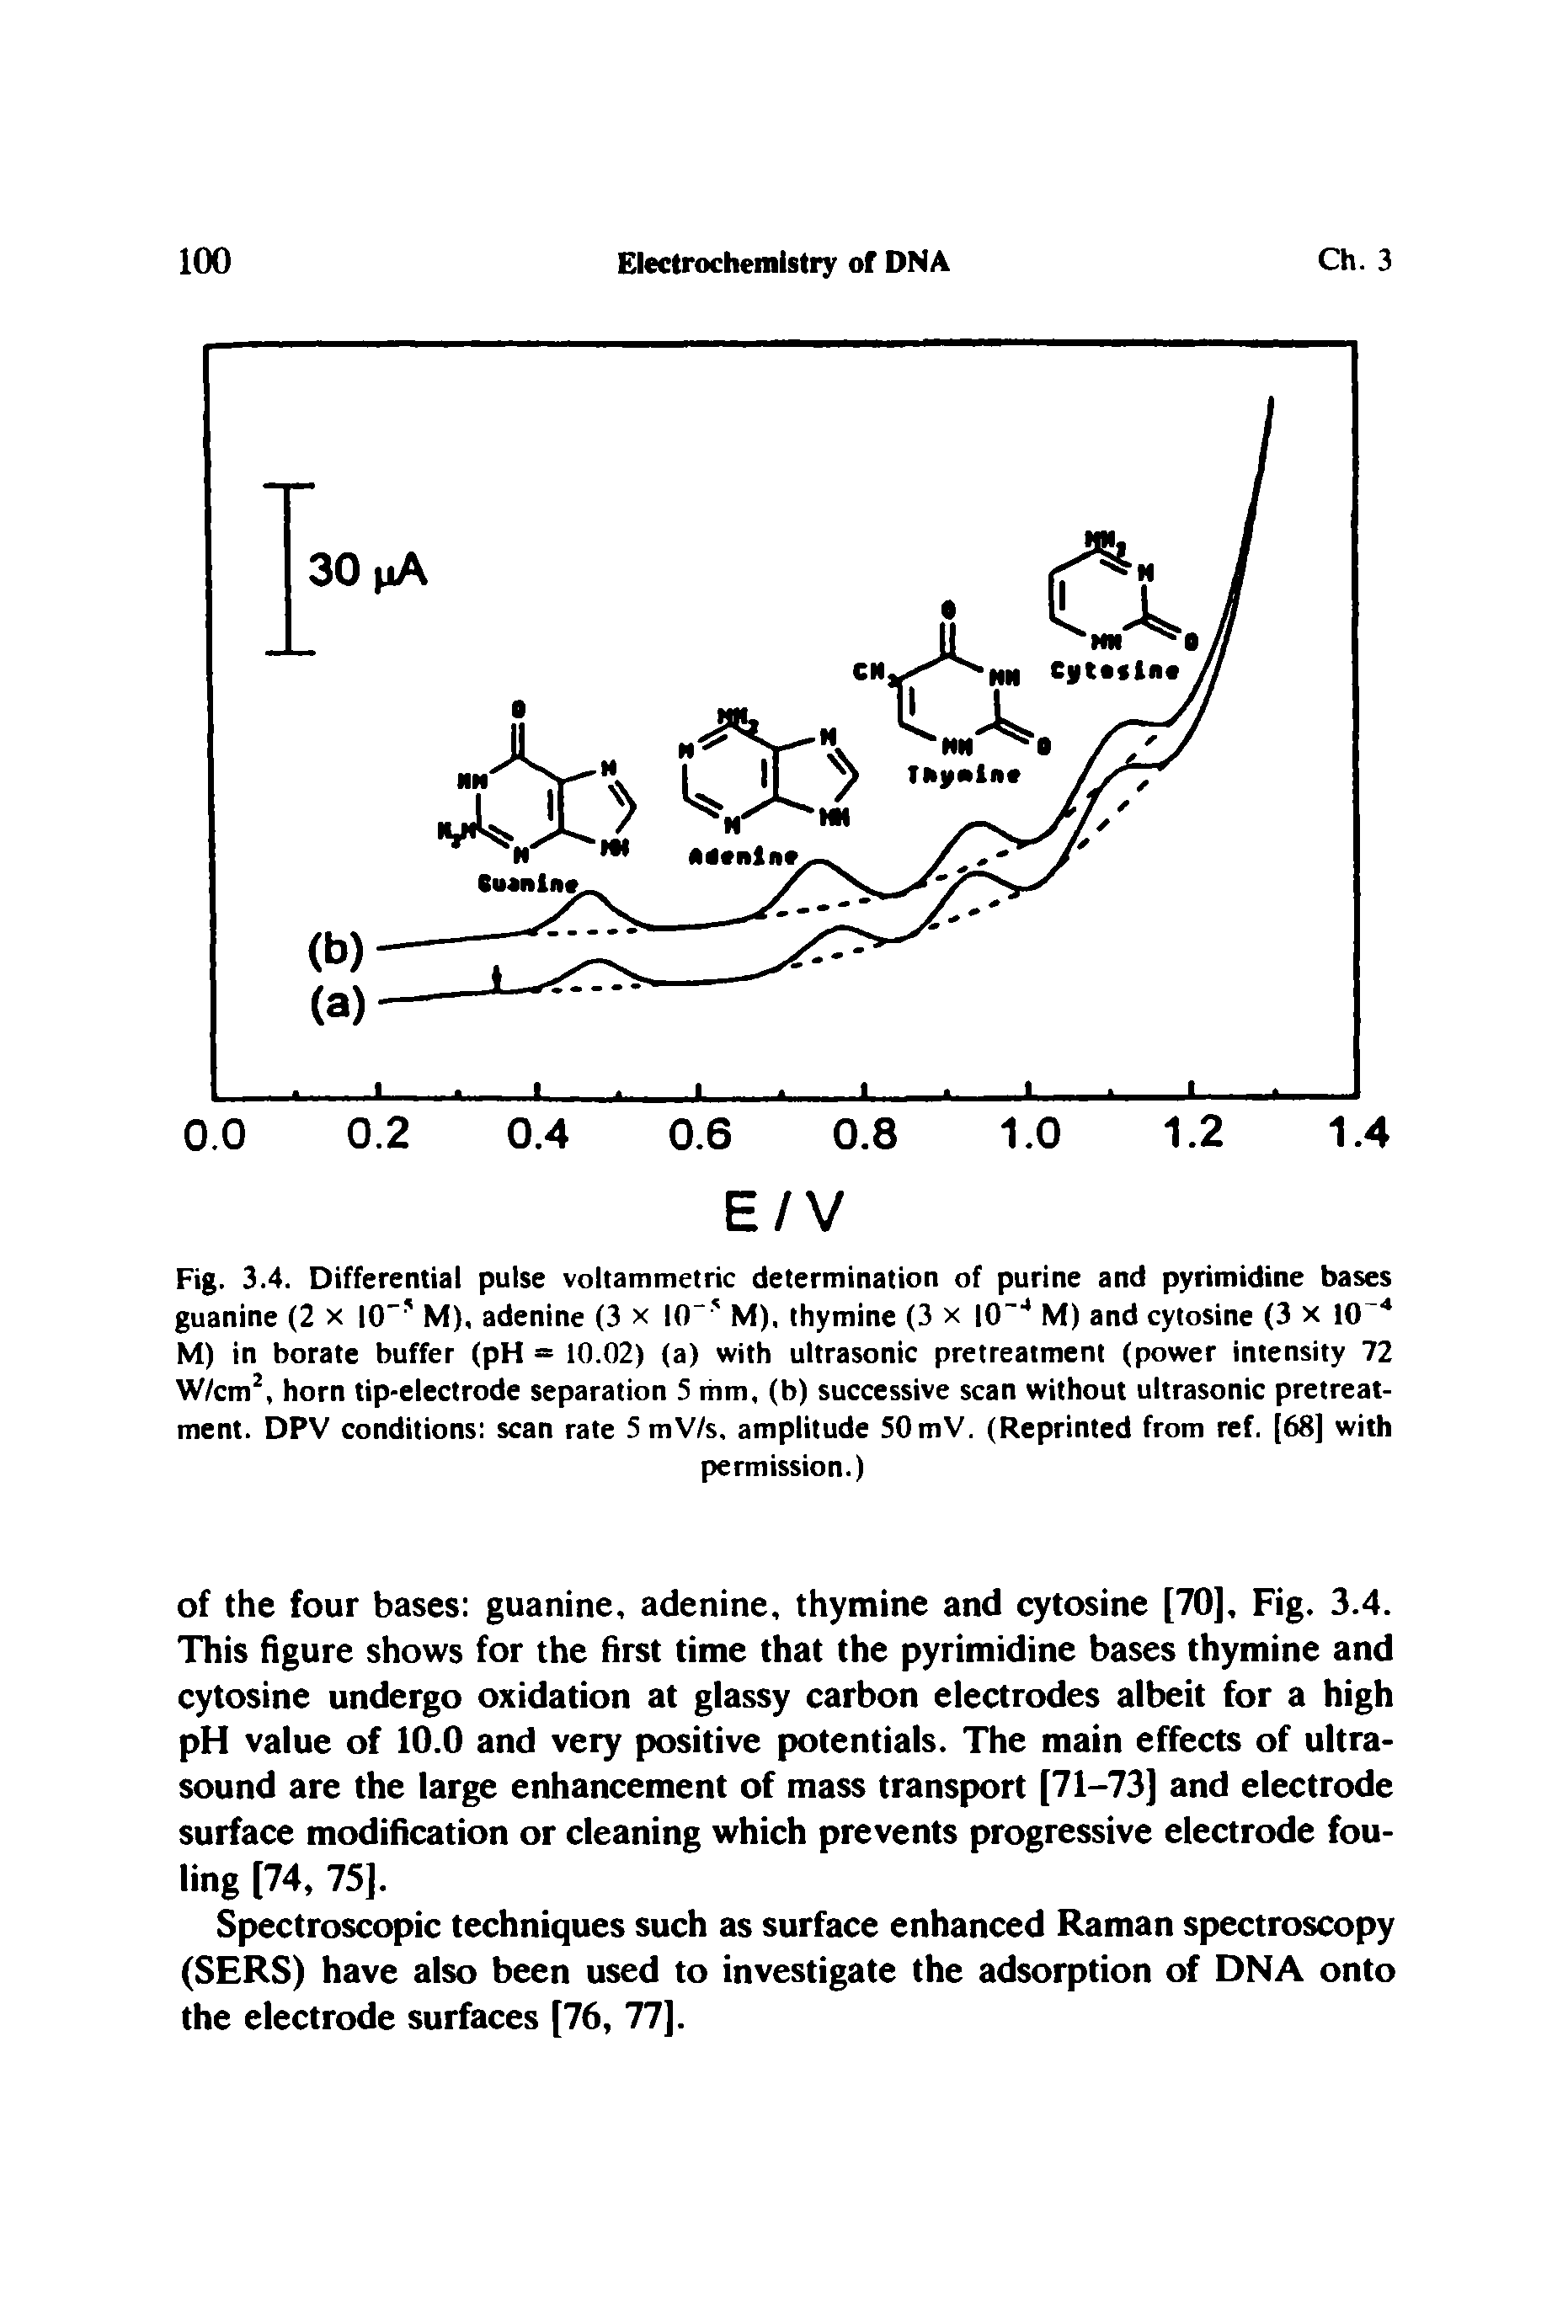 Fig. 3.4. Differential pulse voltammetric determination of purine and pyrimidine bases guanine (2 x lO- M), adenine (3 x I0-5 M), thymine (3 x 0 4 M) and cytosine (3 x 10 4 M) in borate buffer (pH = 10.02) (a) with ultrasonic pretreatment (power intensity 72 W/cm2, horn tip-electrode separation 5 mm, (b) successive scan without ultrasonic pretreatment. DPV conditions scan rate 5 mV/s, amplitude 50 mV. (Reprinted from ref. [68] with...